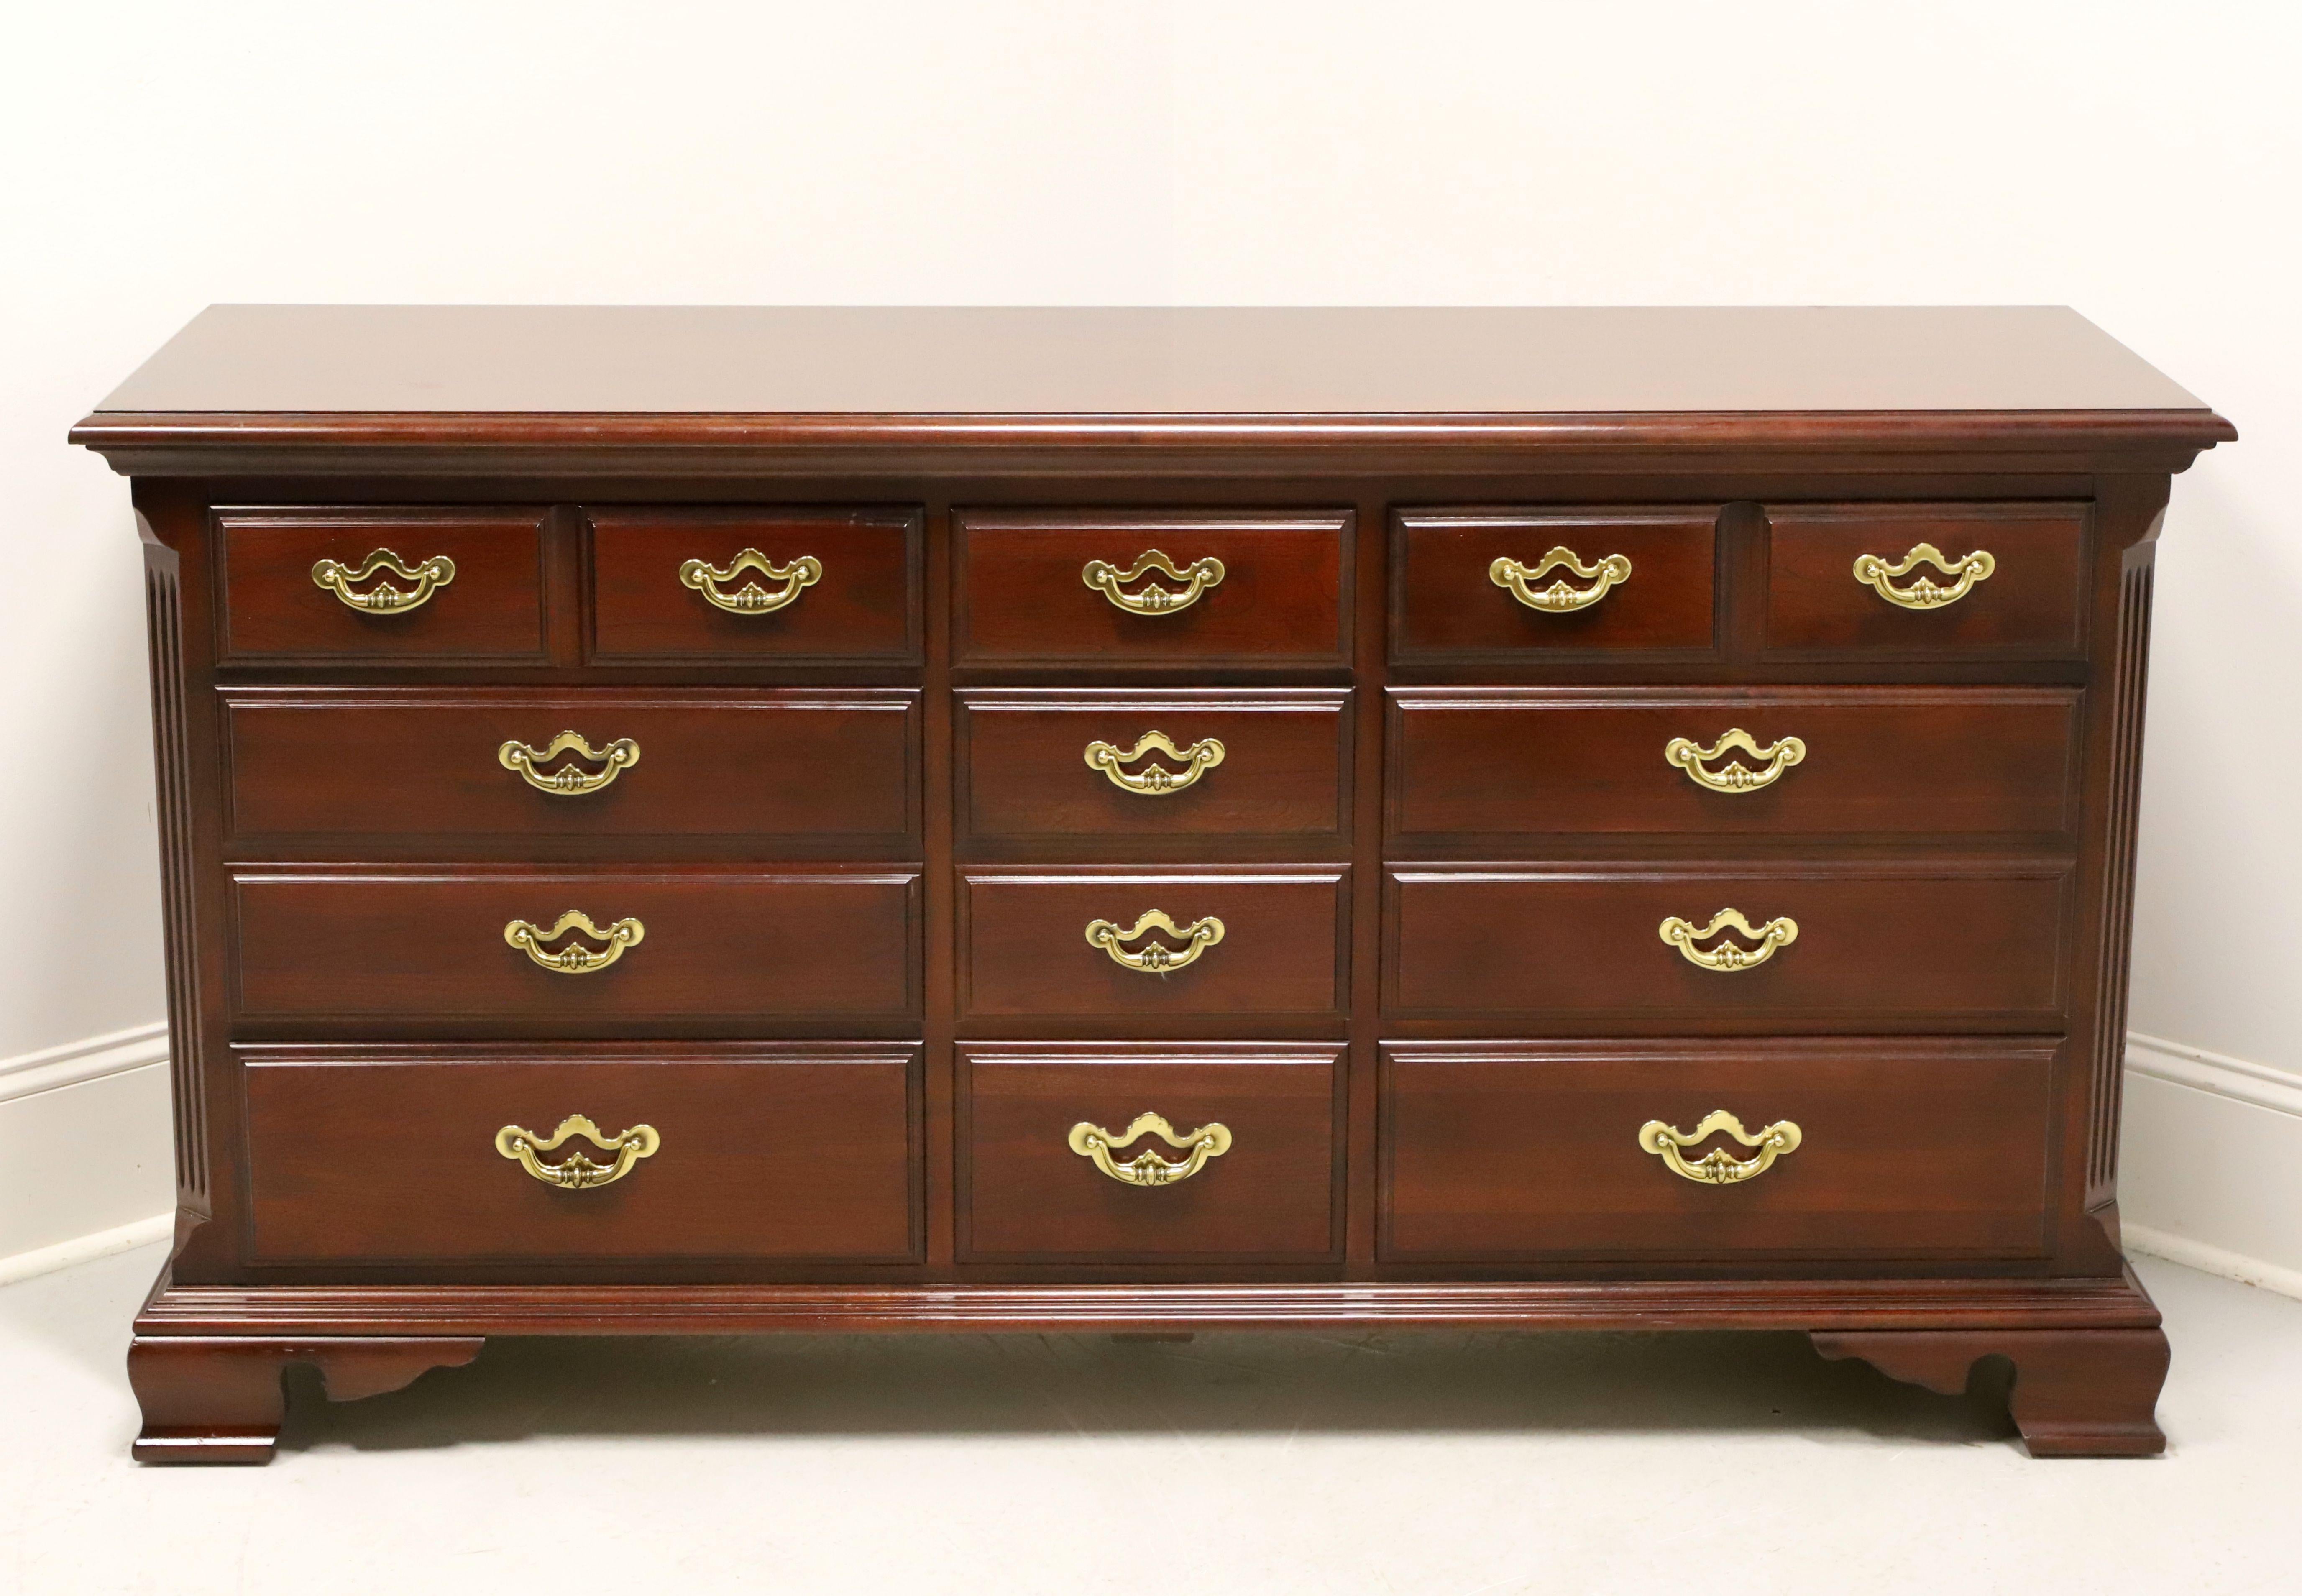 A Chippendale style triple dresser by Thomasville, from their Collectors Cherry Collection. Cherry wood with brass hardware, bevel edge to the top, and ogee bracket feet. Features nice various size drawers of dovetail construction. Made in North